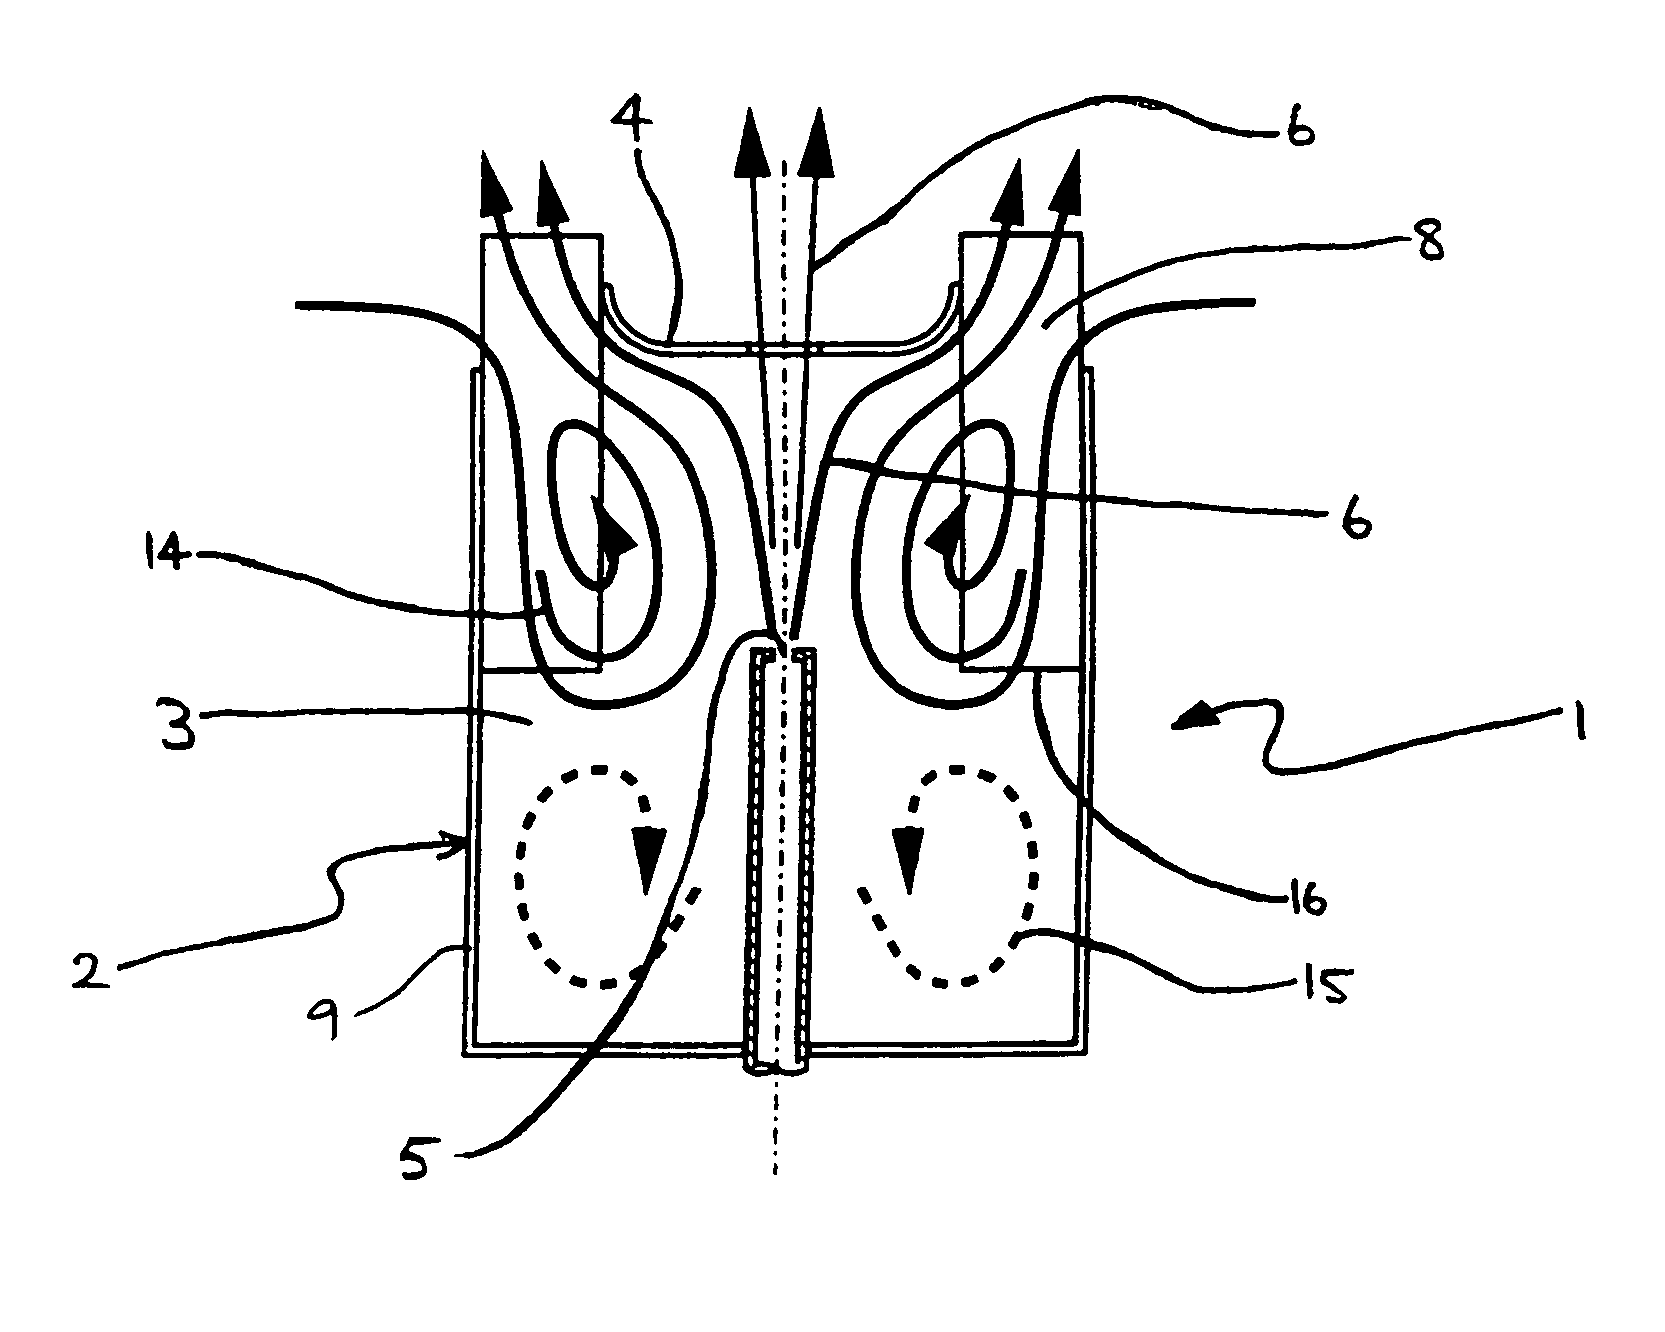 Fluid mixing device